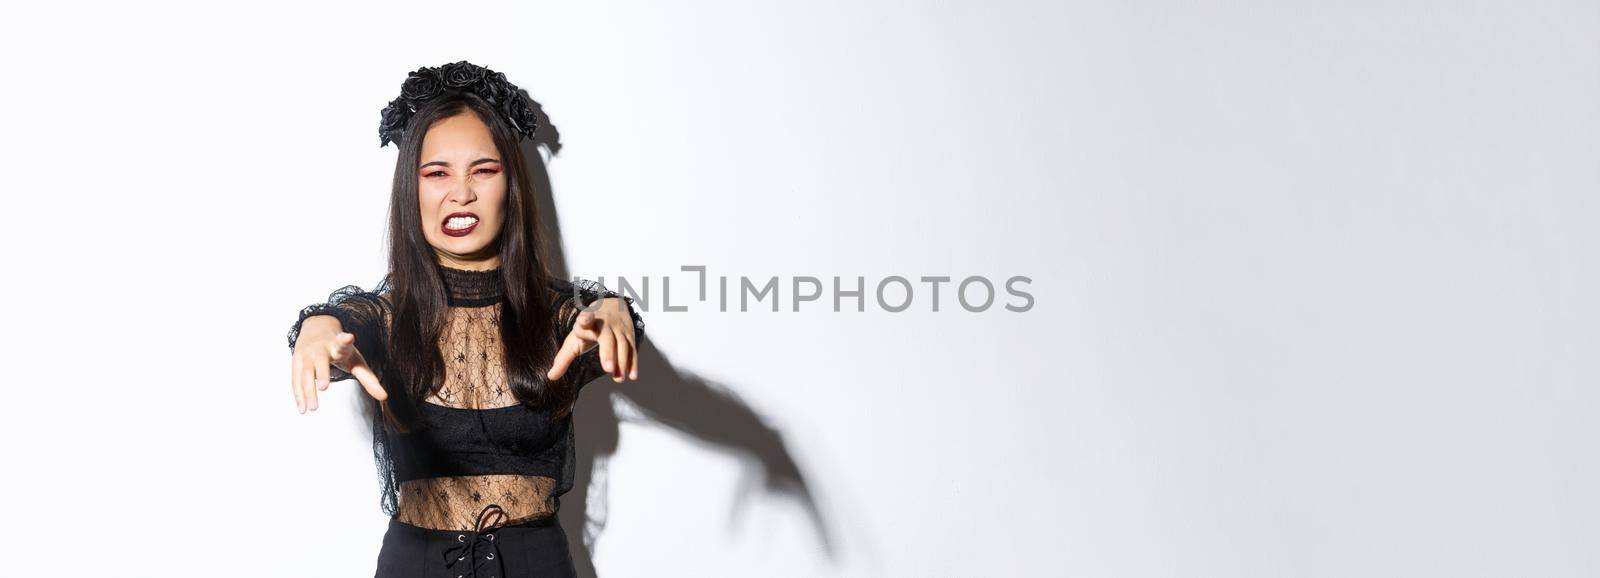 Image of beautiful undead evil witch cursing someone on halloween. Girl in party costume extend hands foward and looking scary, going for trick or treat, standing over white background.